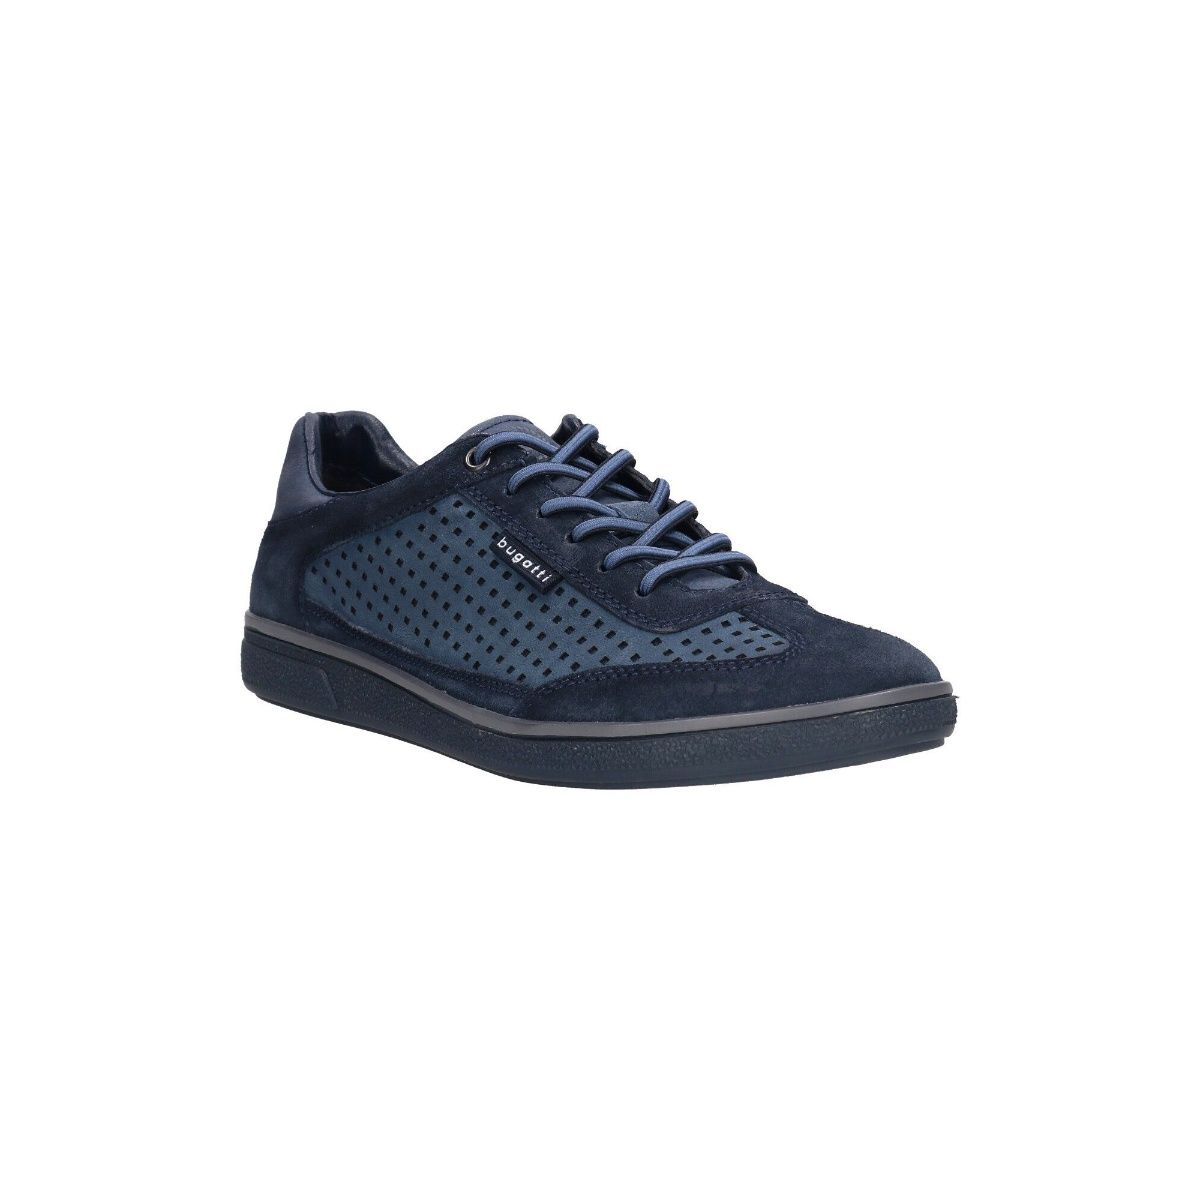 Sperry® Crest Vibe Sneakers - Solid | Talbots